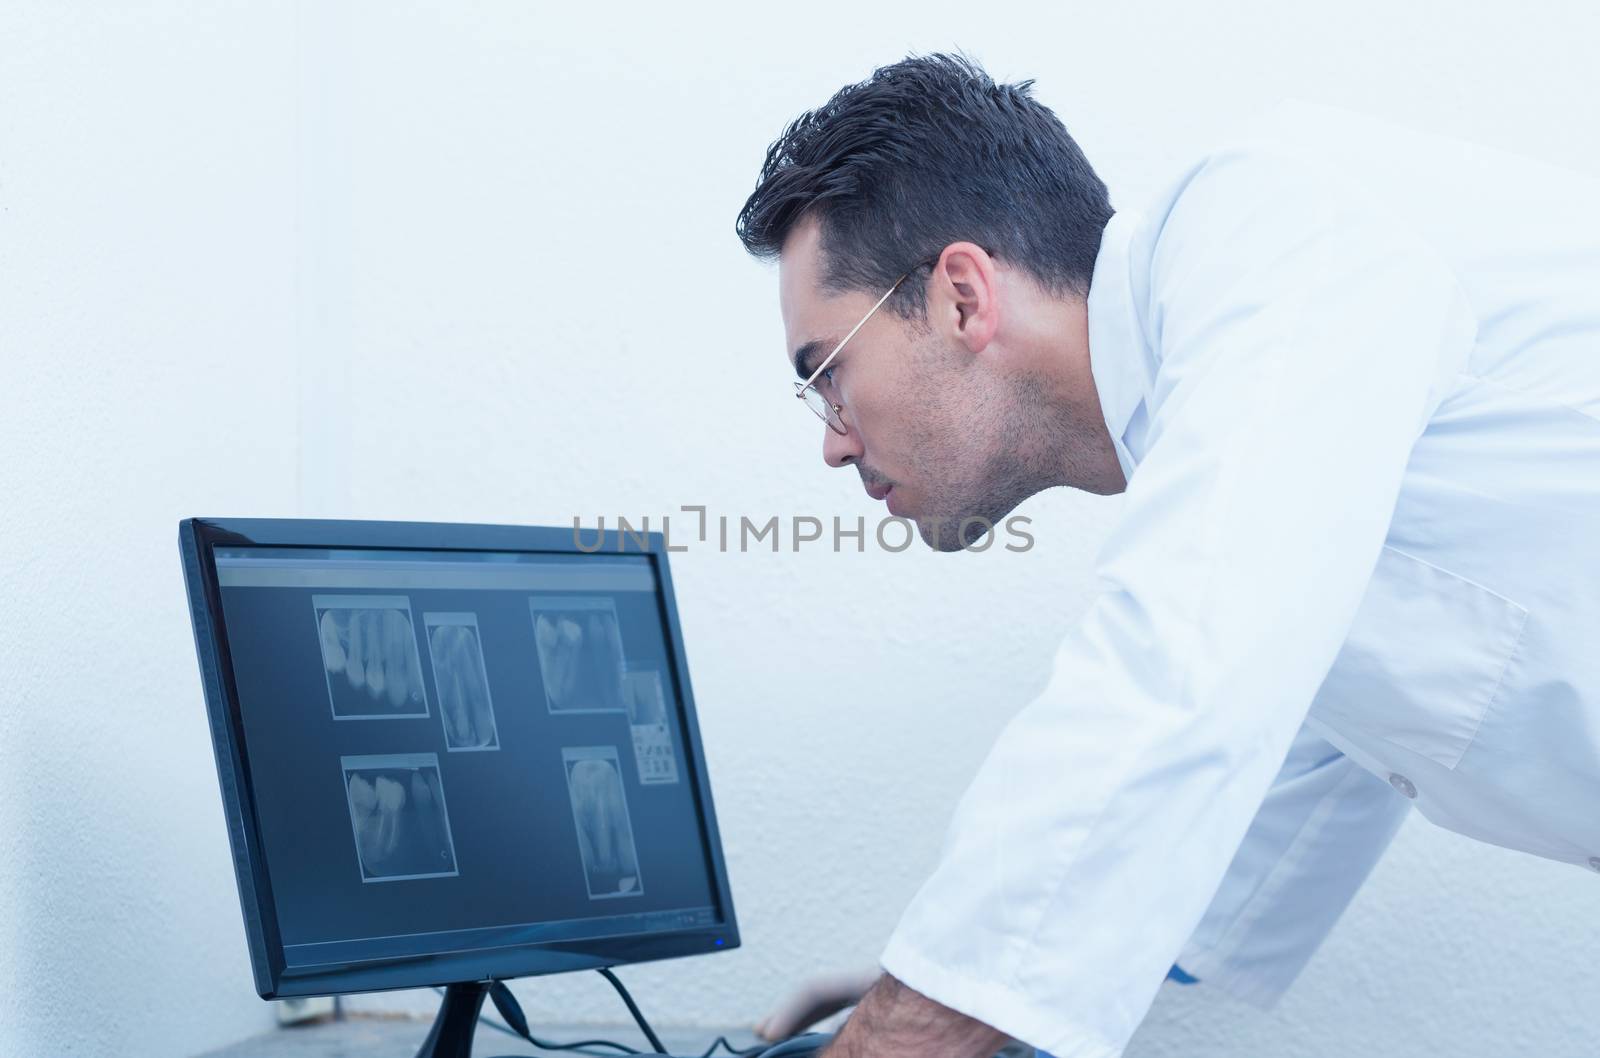 Dentist looking at x-ray on computer by Wavebreakmedia